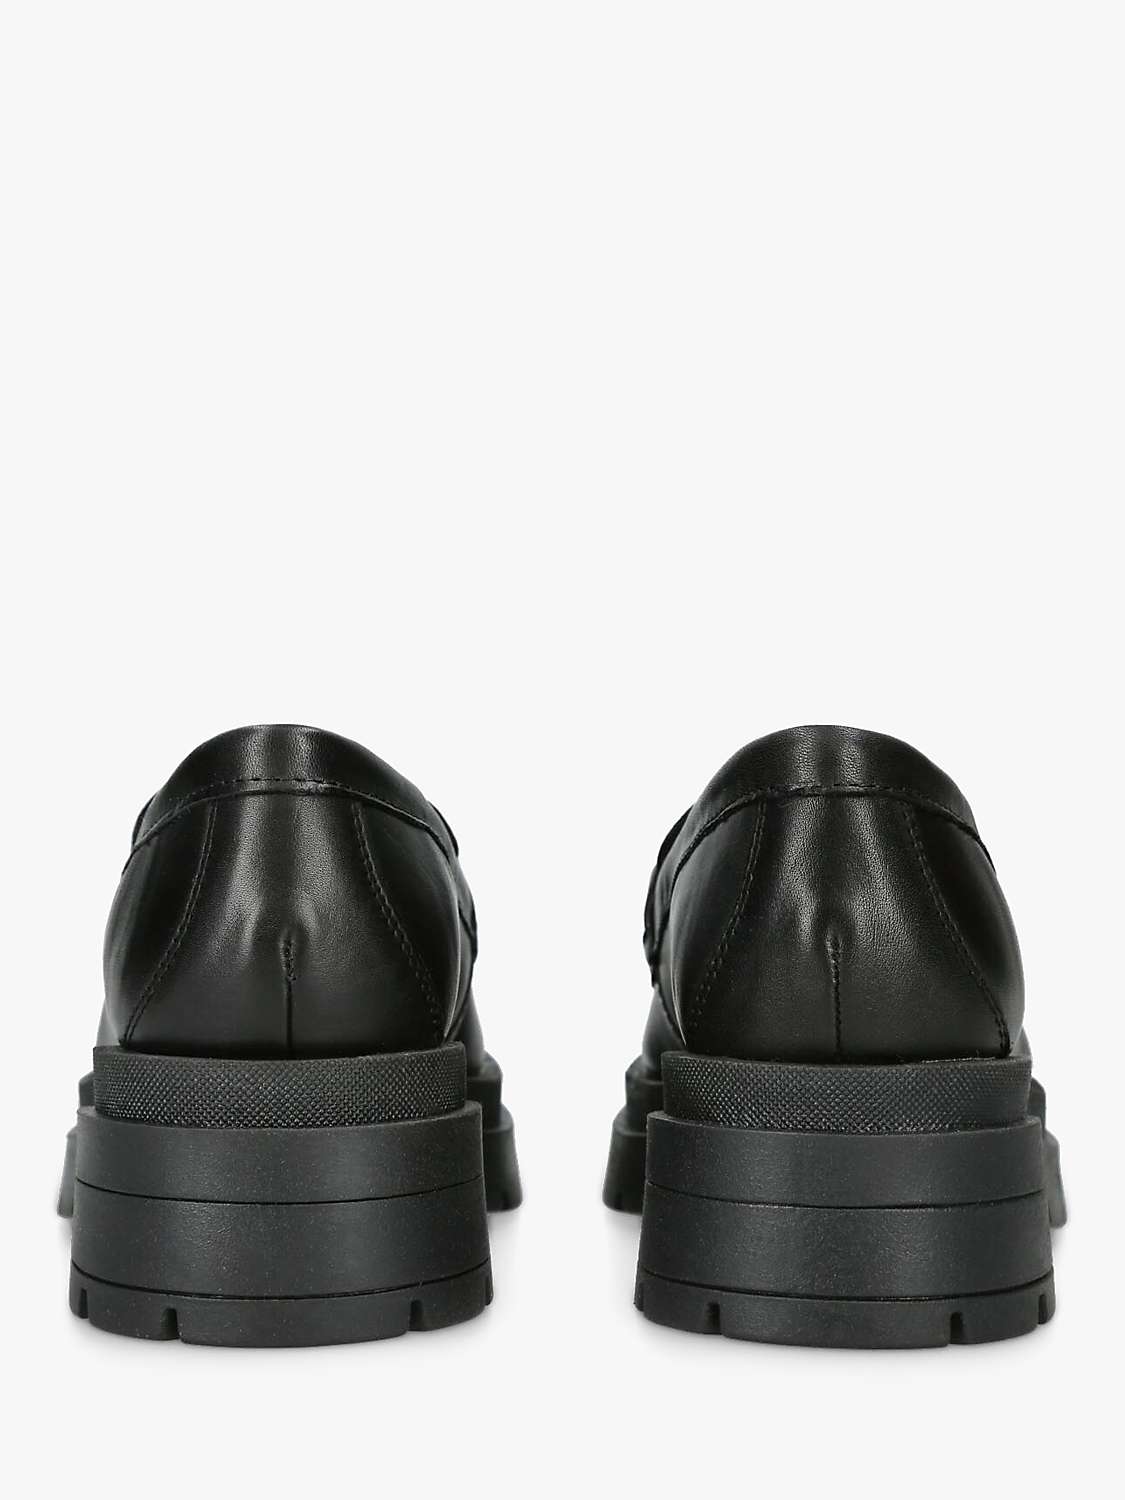 Kurt Geiger London Chelsea Chunky Loafers at John Lewis & Partners